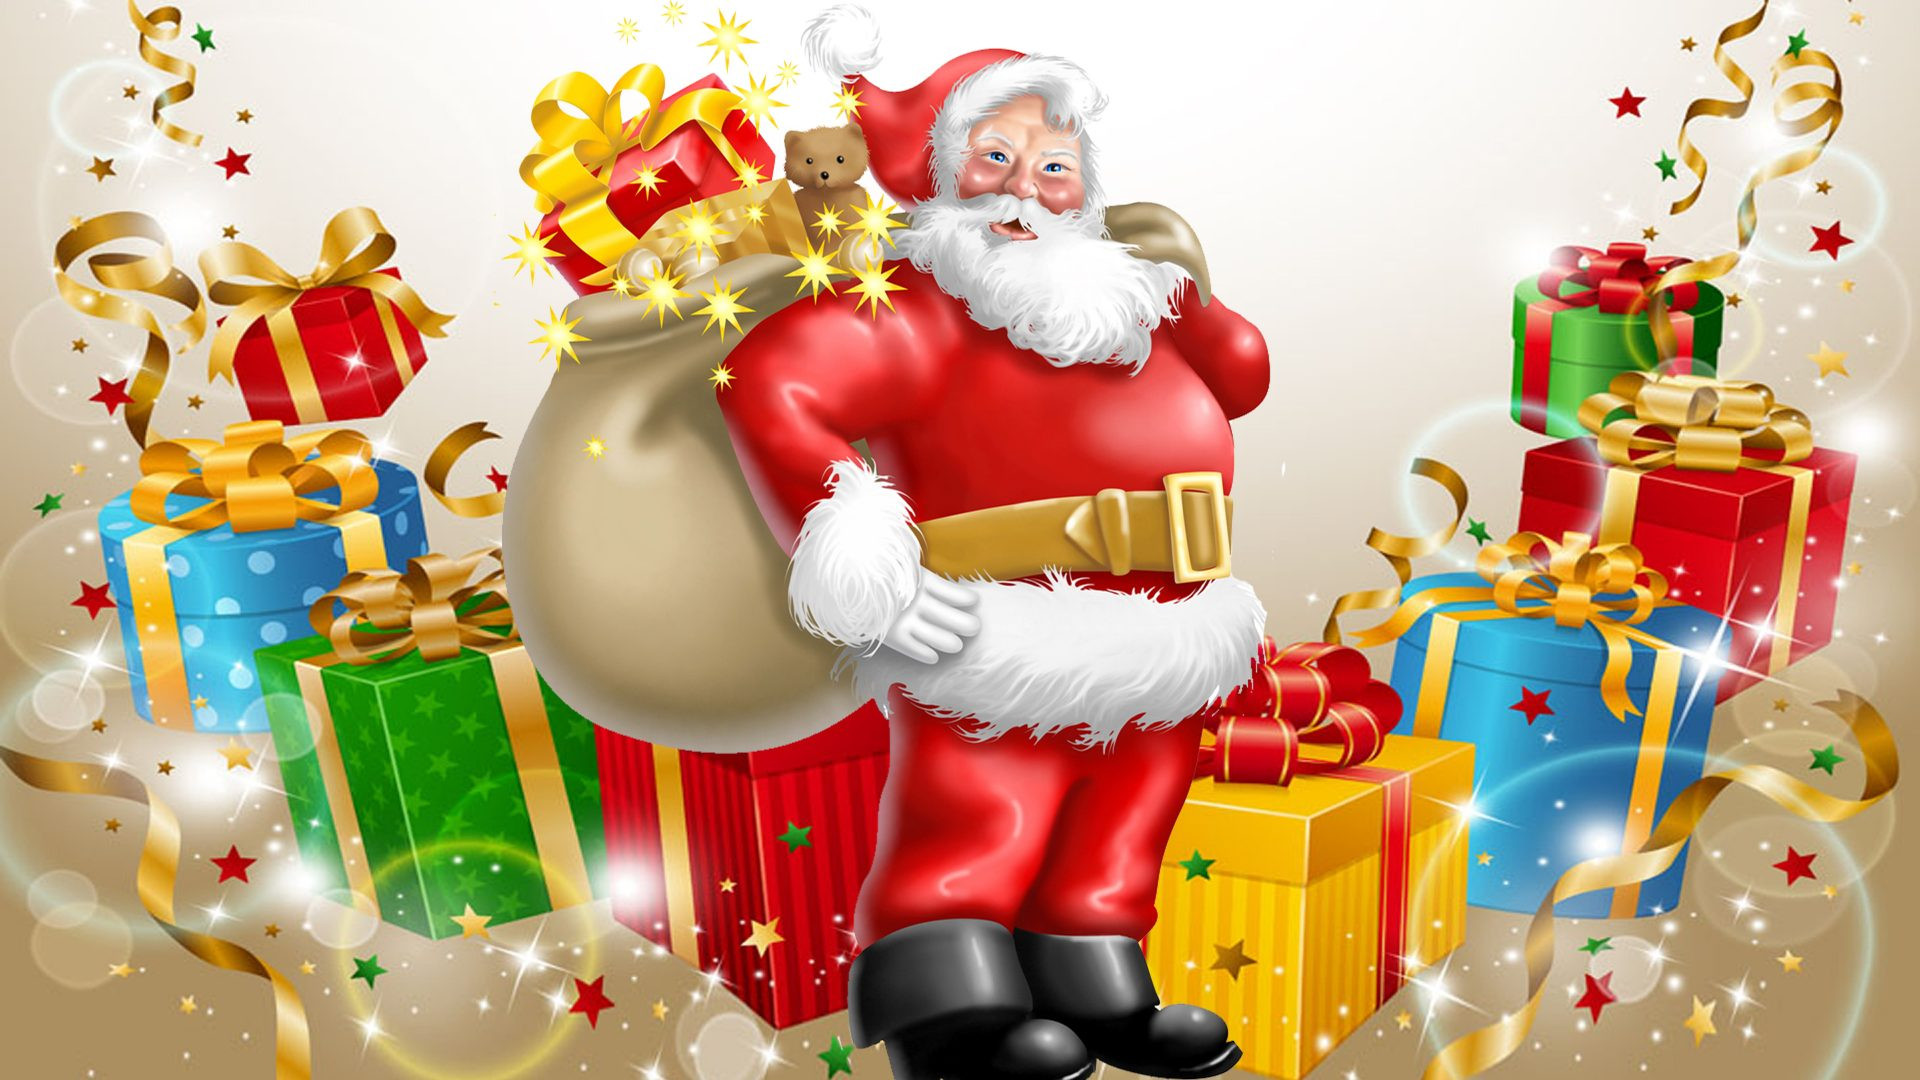 Free Christmas Gifts For Children
 Santa Claus Happy New Year And Merry Christmas Gifts For